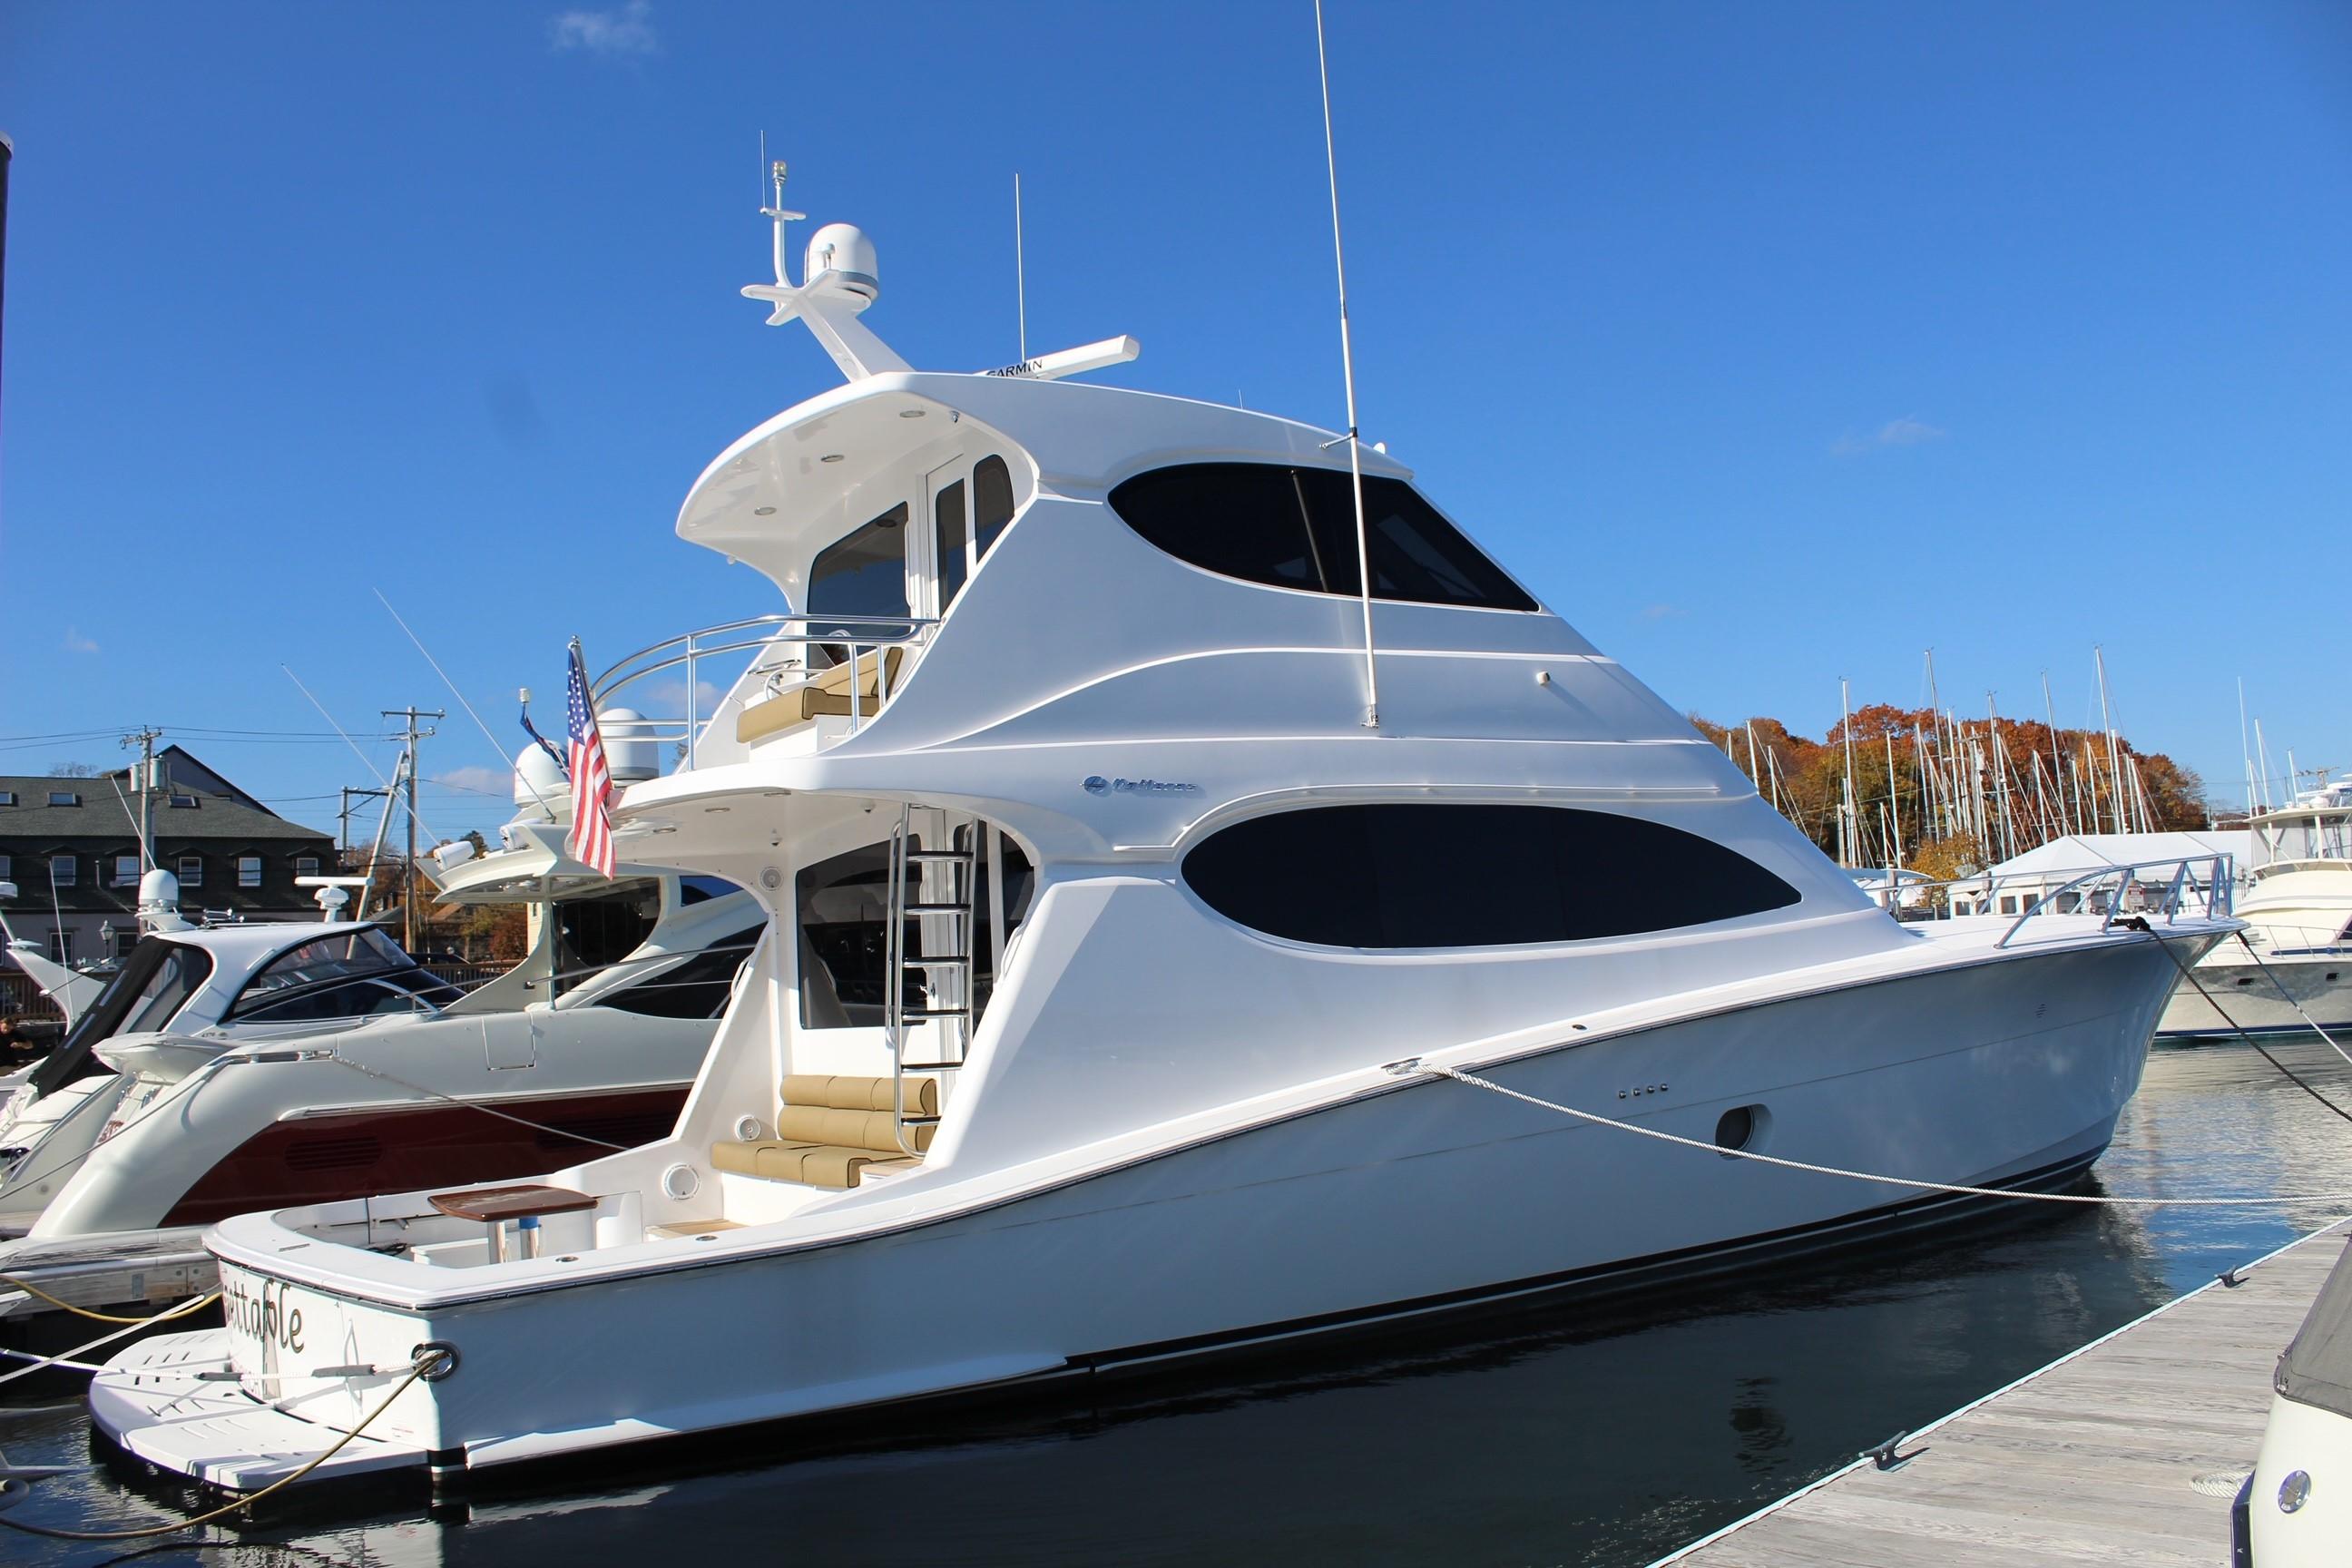 64 ft yacht for sale